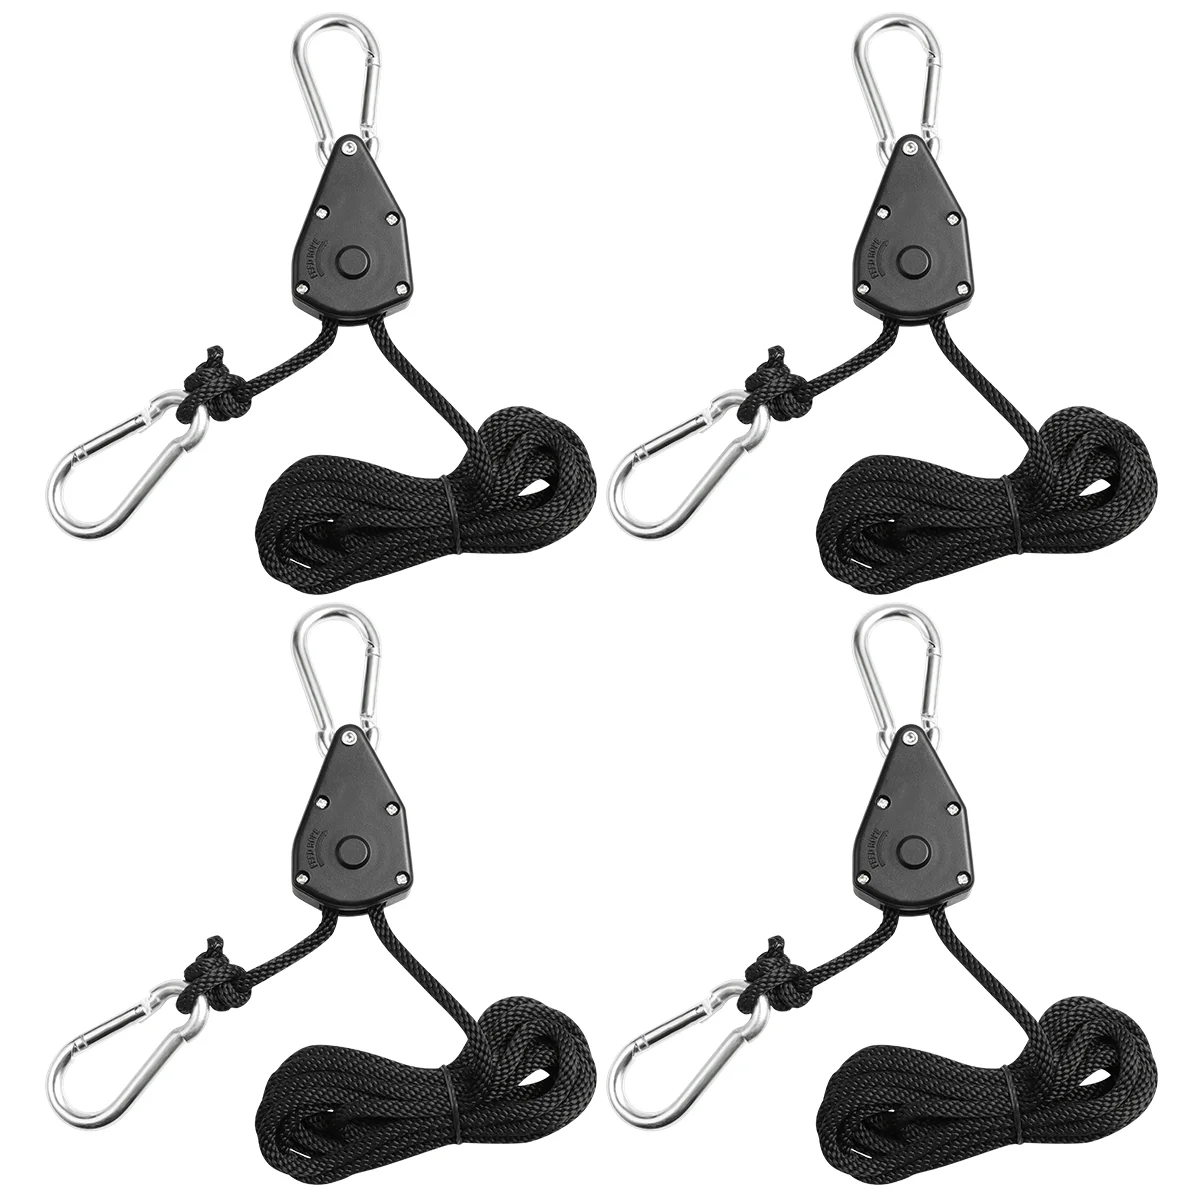 

tarp clips pulley hanger rope light hangers ratchet pulleys for lifting- 4PCS Durable Heavy Duty Adjustable Grow Light Hangers